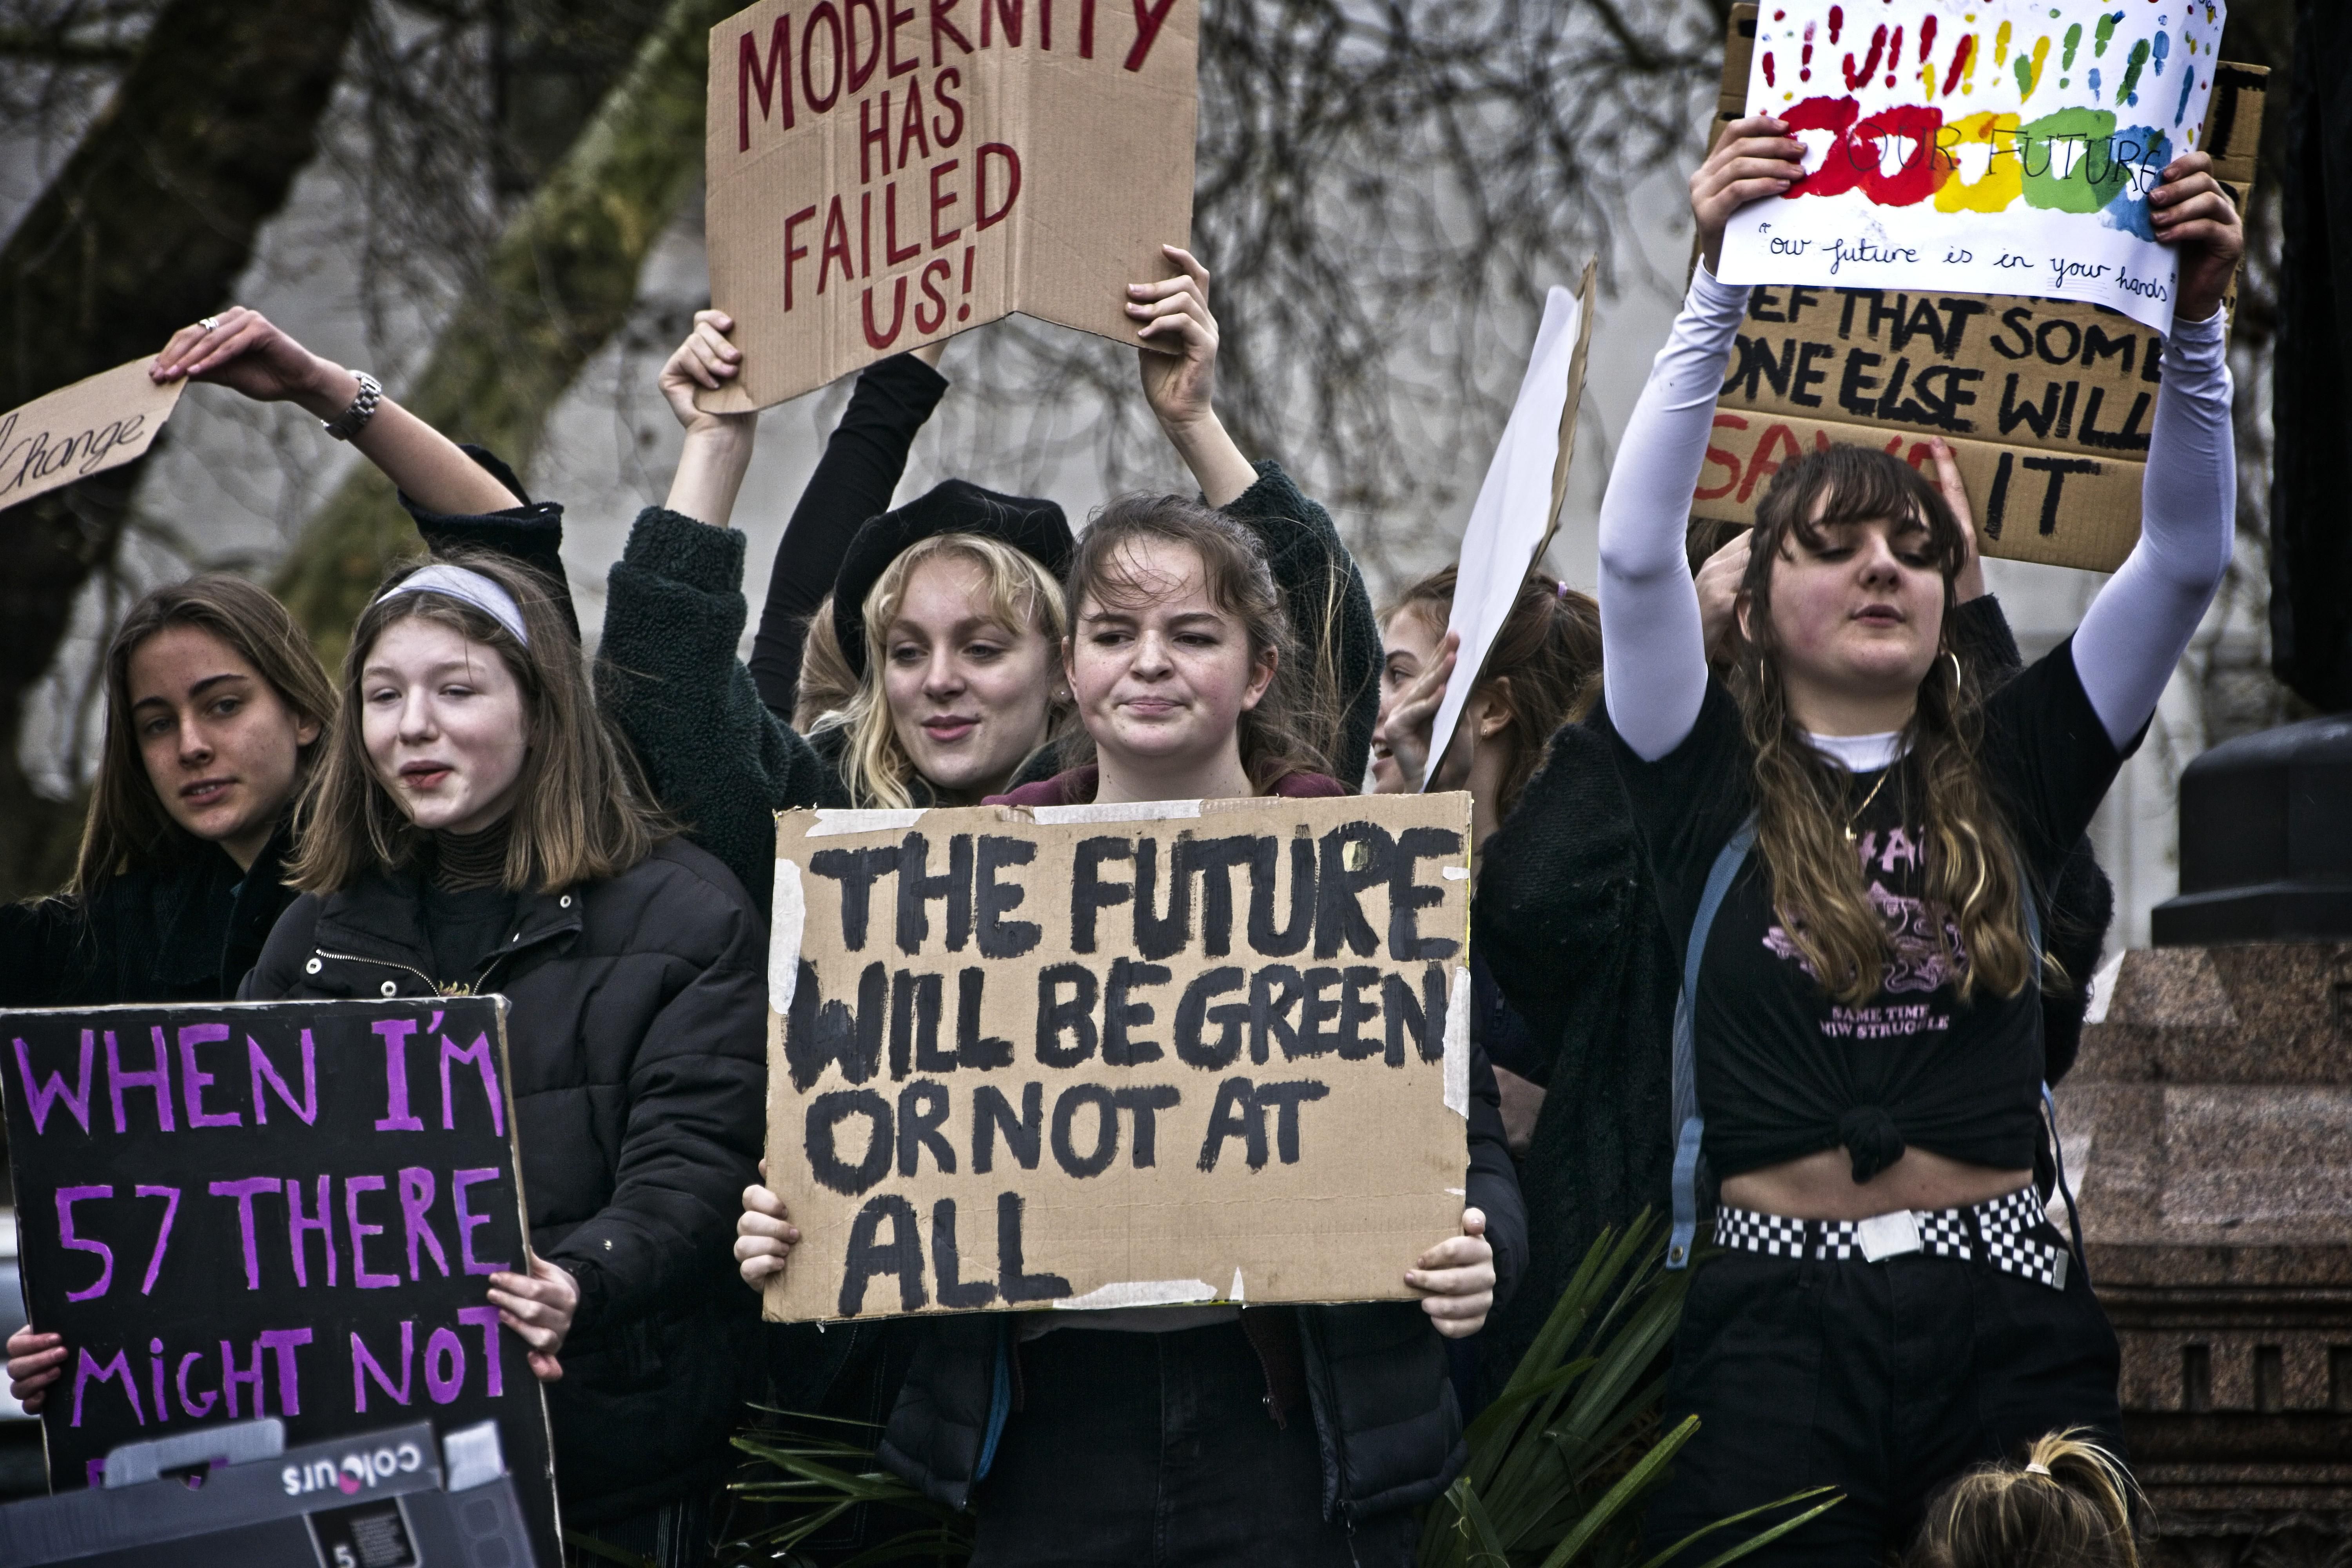 Fighting for a future: Young protesters at the Global Climate Strike in London on March 15, 2019. (Photo: Garry Knight/Flickr)